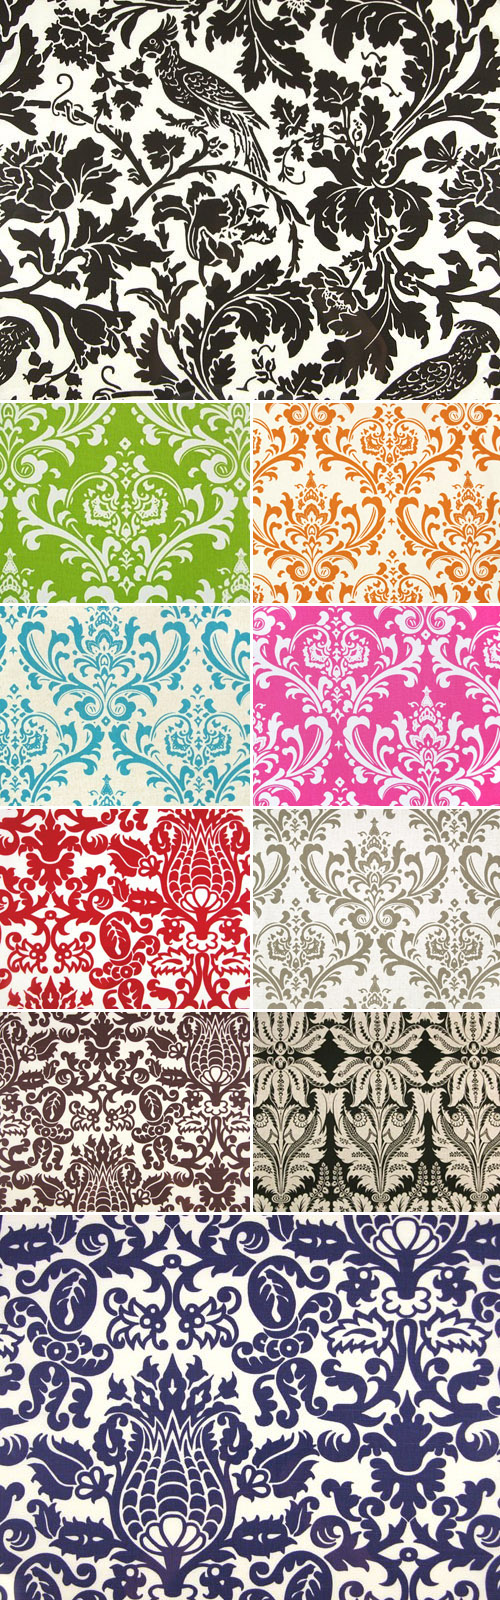 colorful damask wedding table runners from Bateson's Boutique